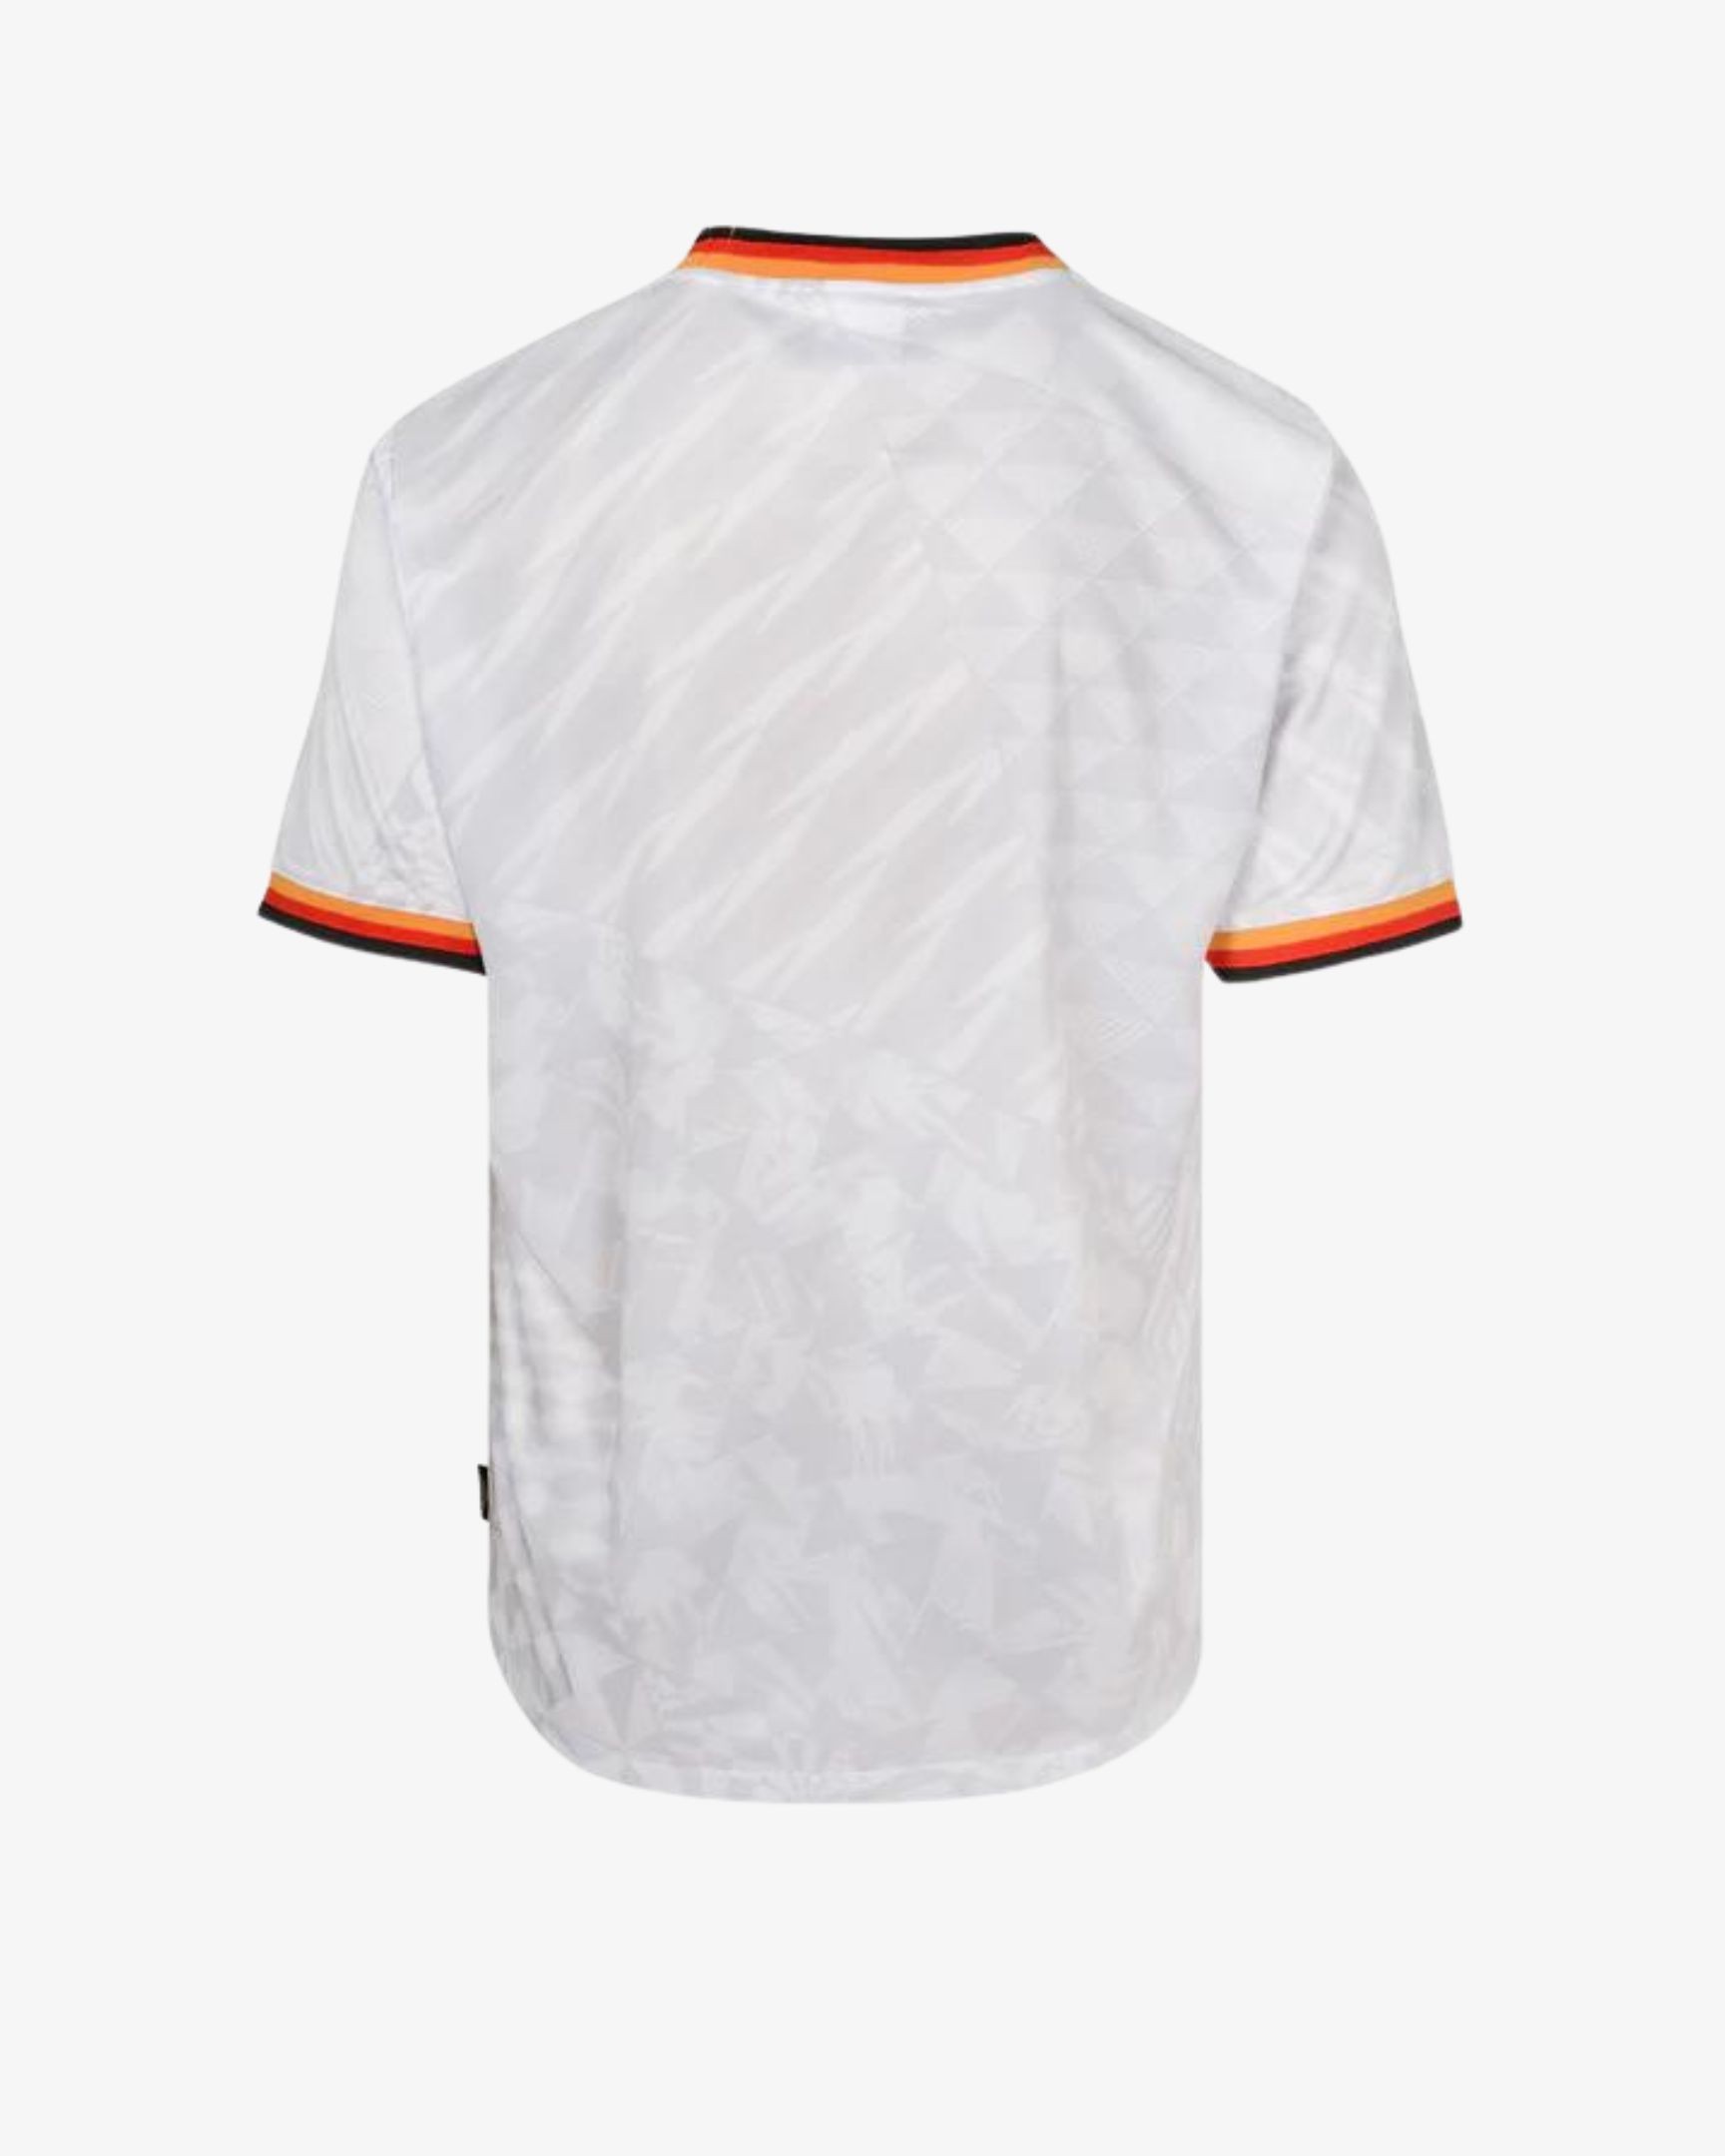 GERMANY ICONIC GRAPHIC JERSEY